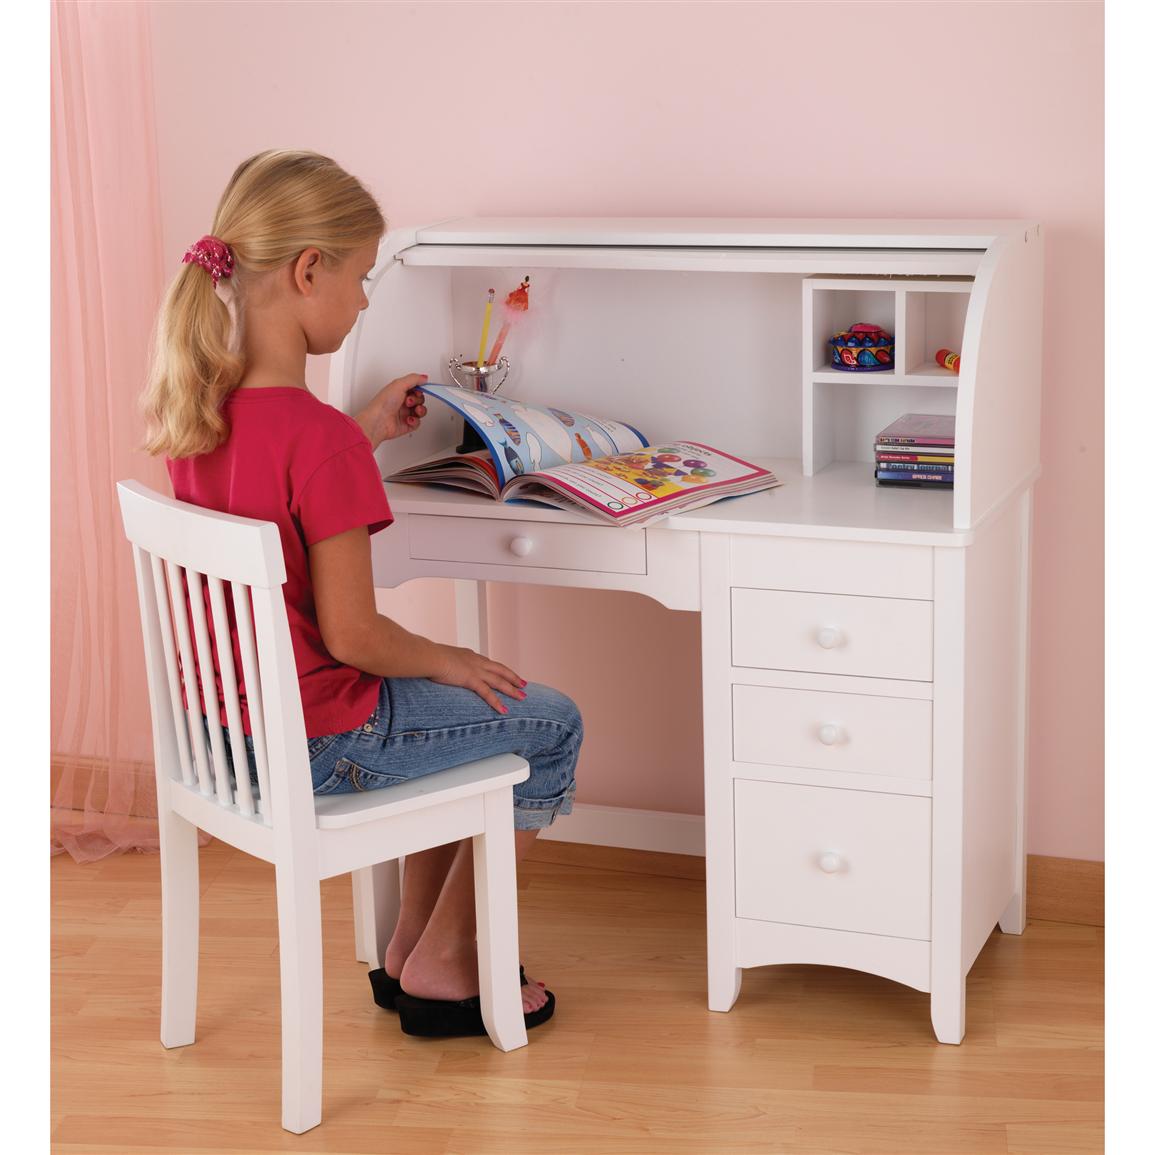 Kidkraft Roll Top Desk And Chair 125706 Toys At Sportsman S Guide